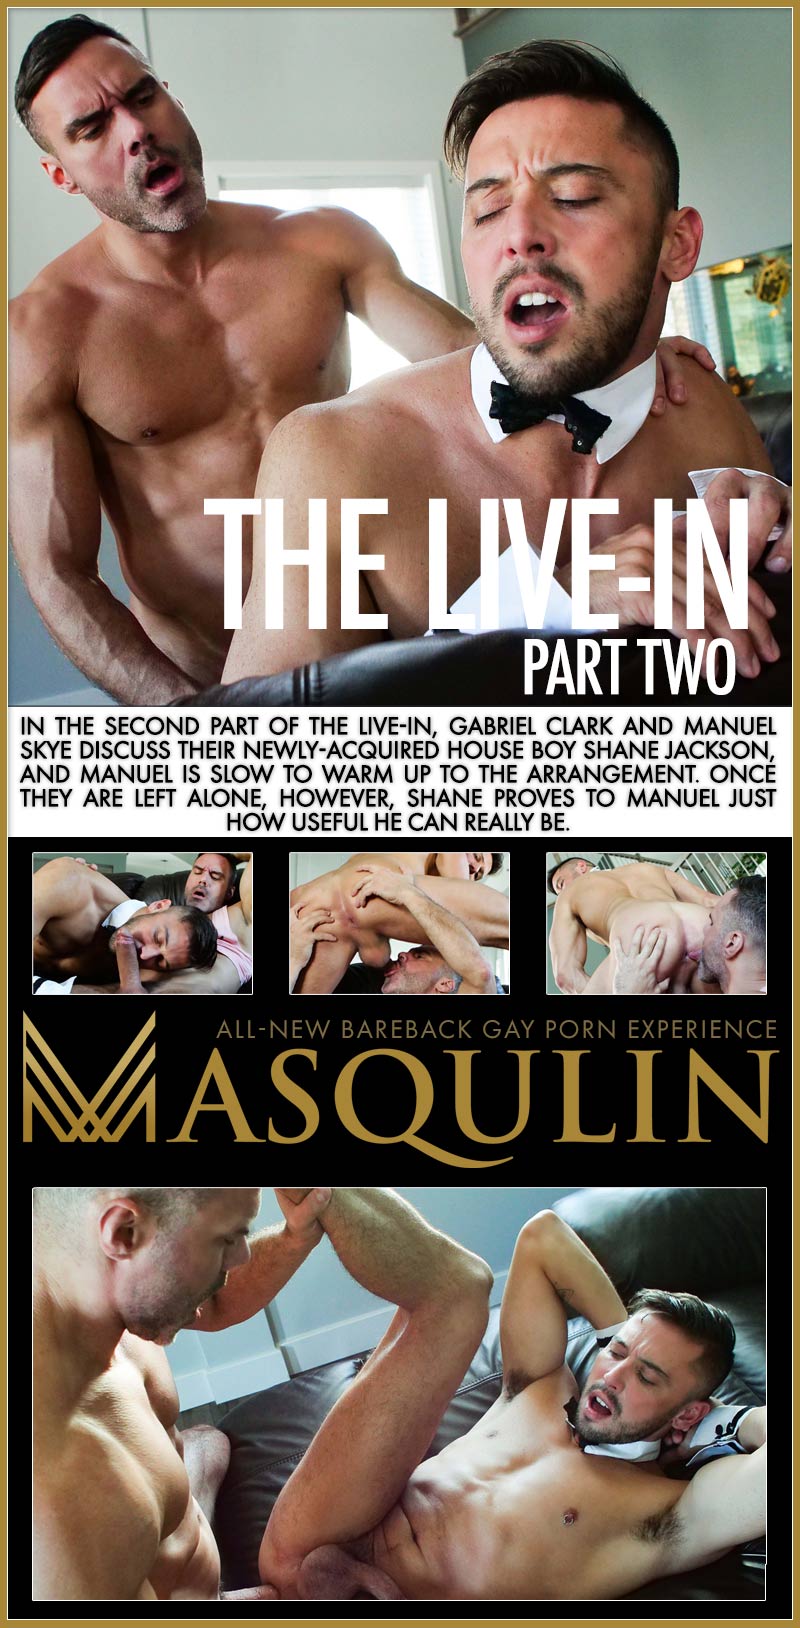 The Live-In, Part Two (Manuel Skye Fucks Shane Jackson) at MASQULIN